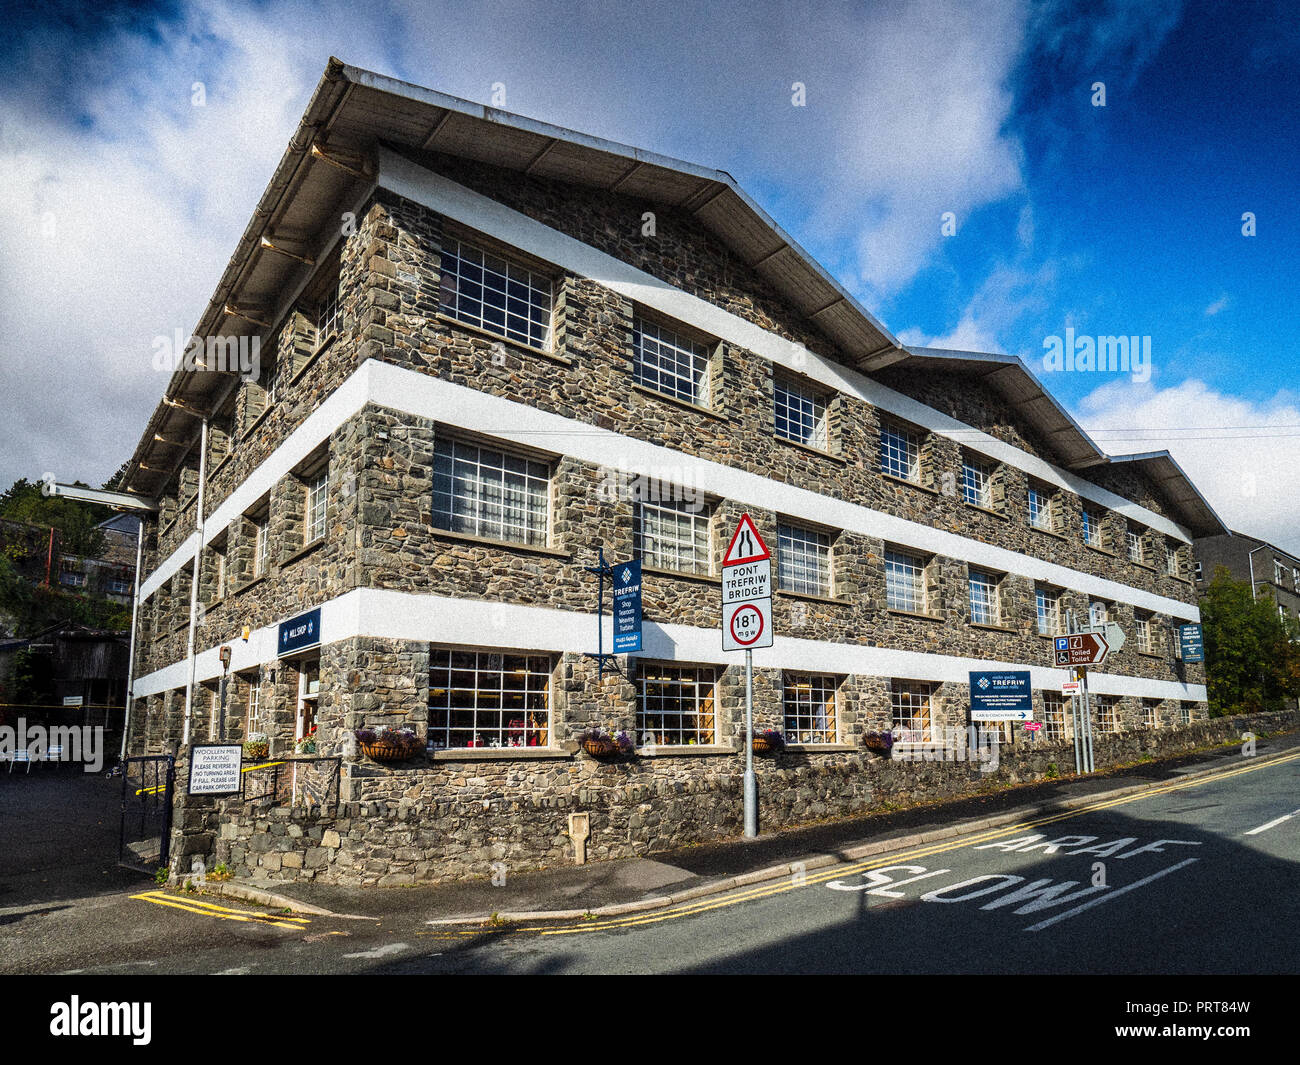 Trefriw Woollen Mills in N.Wales, one of the last remaining woollen mills still in production in Wales. Known for traditional double-weave blankets. Stock Photo